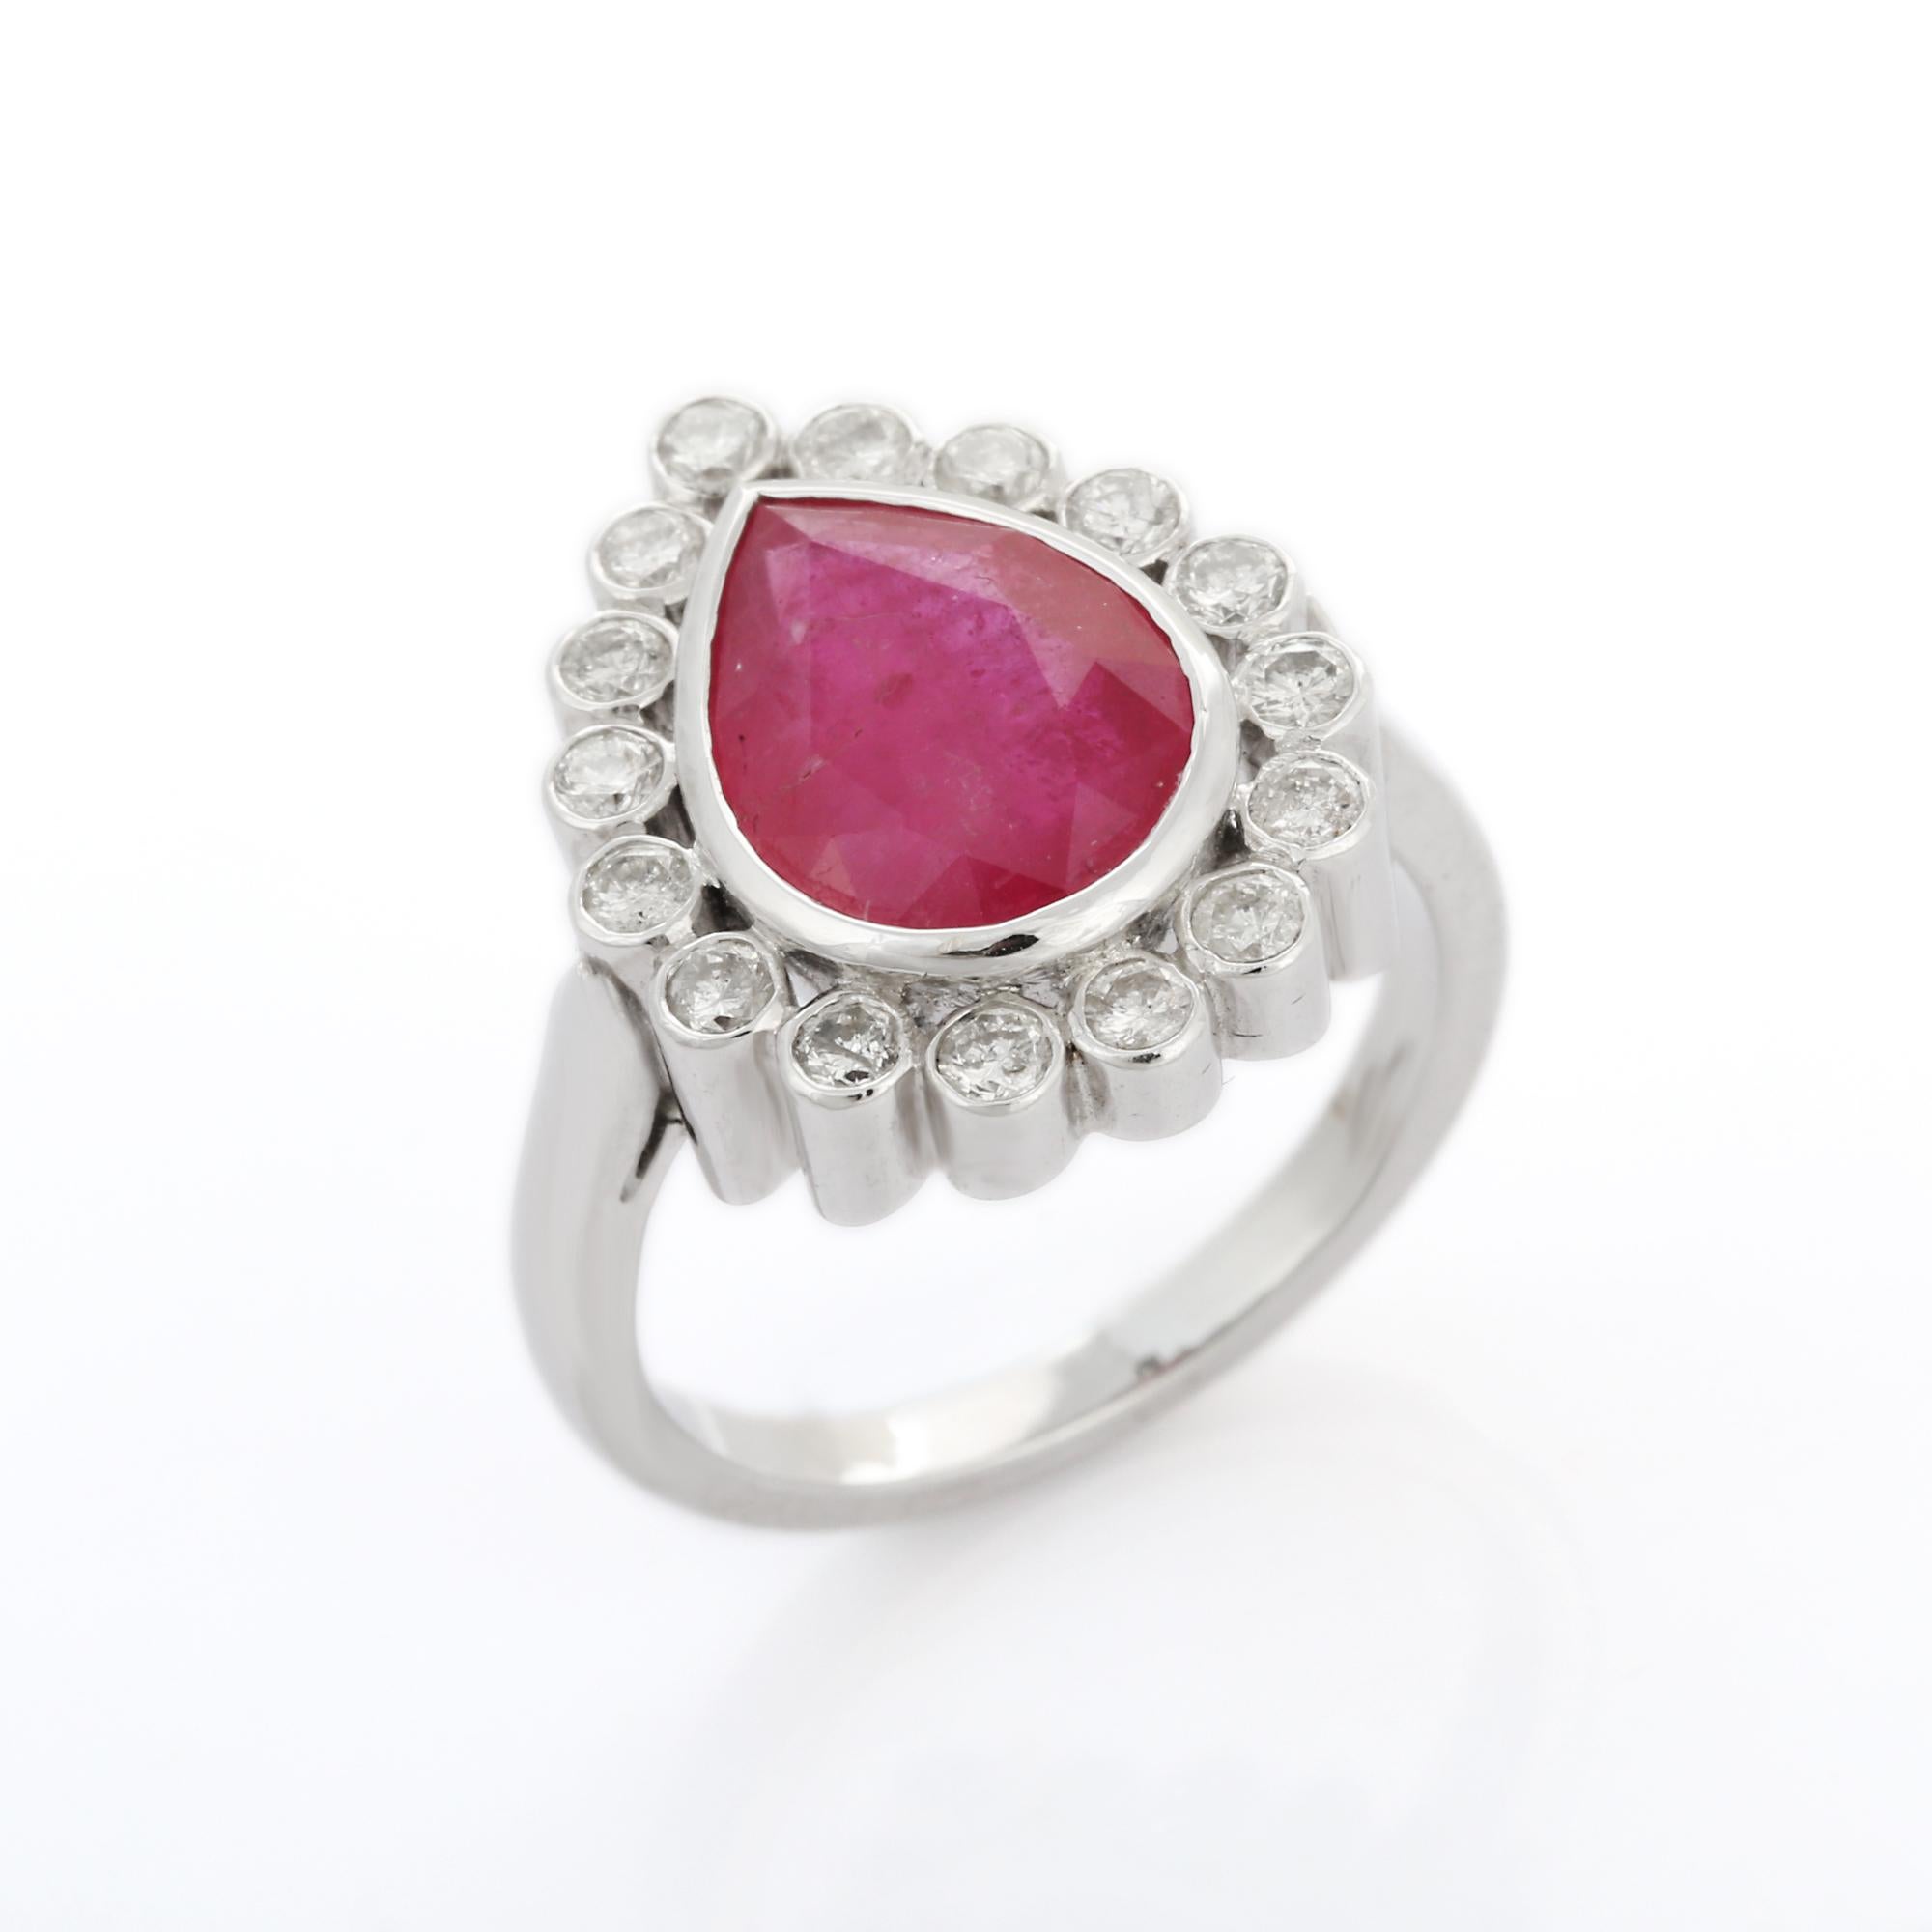 For Sale:  18K White Gold Pear Cut Ruby Cocktail Ring with Diamonds 6